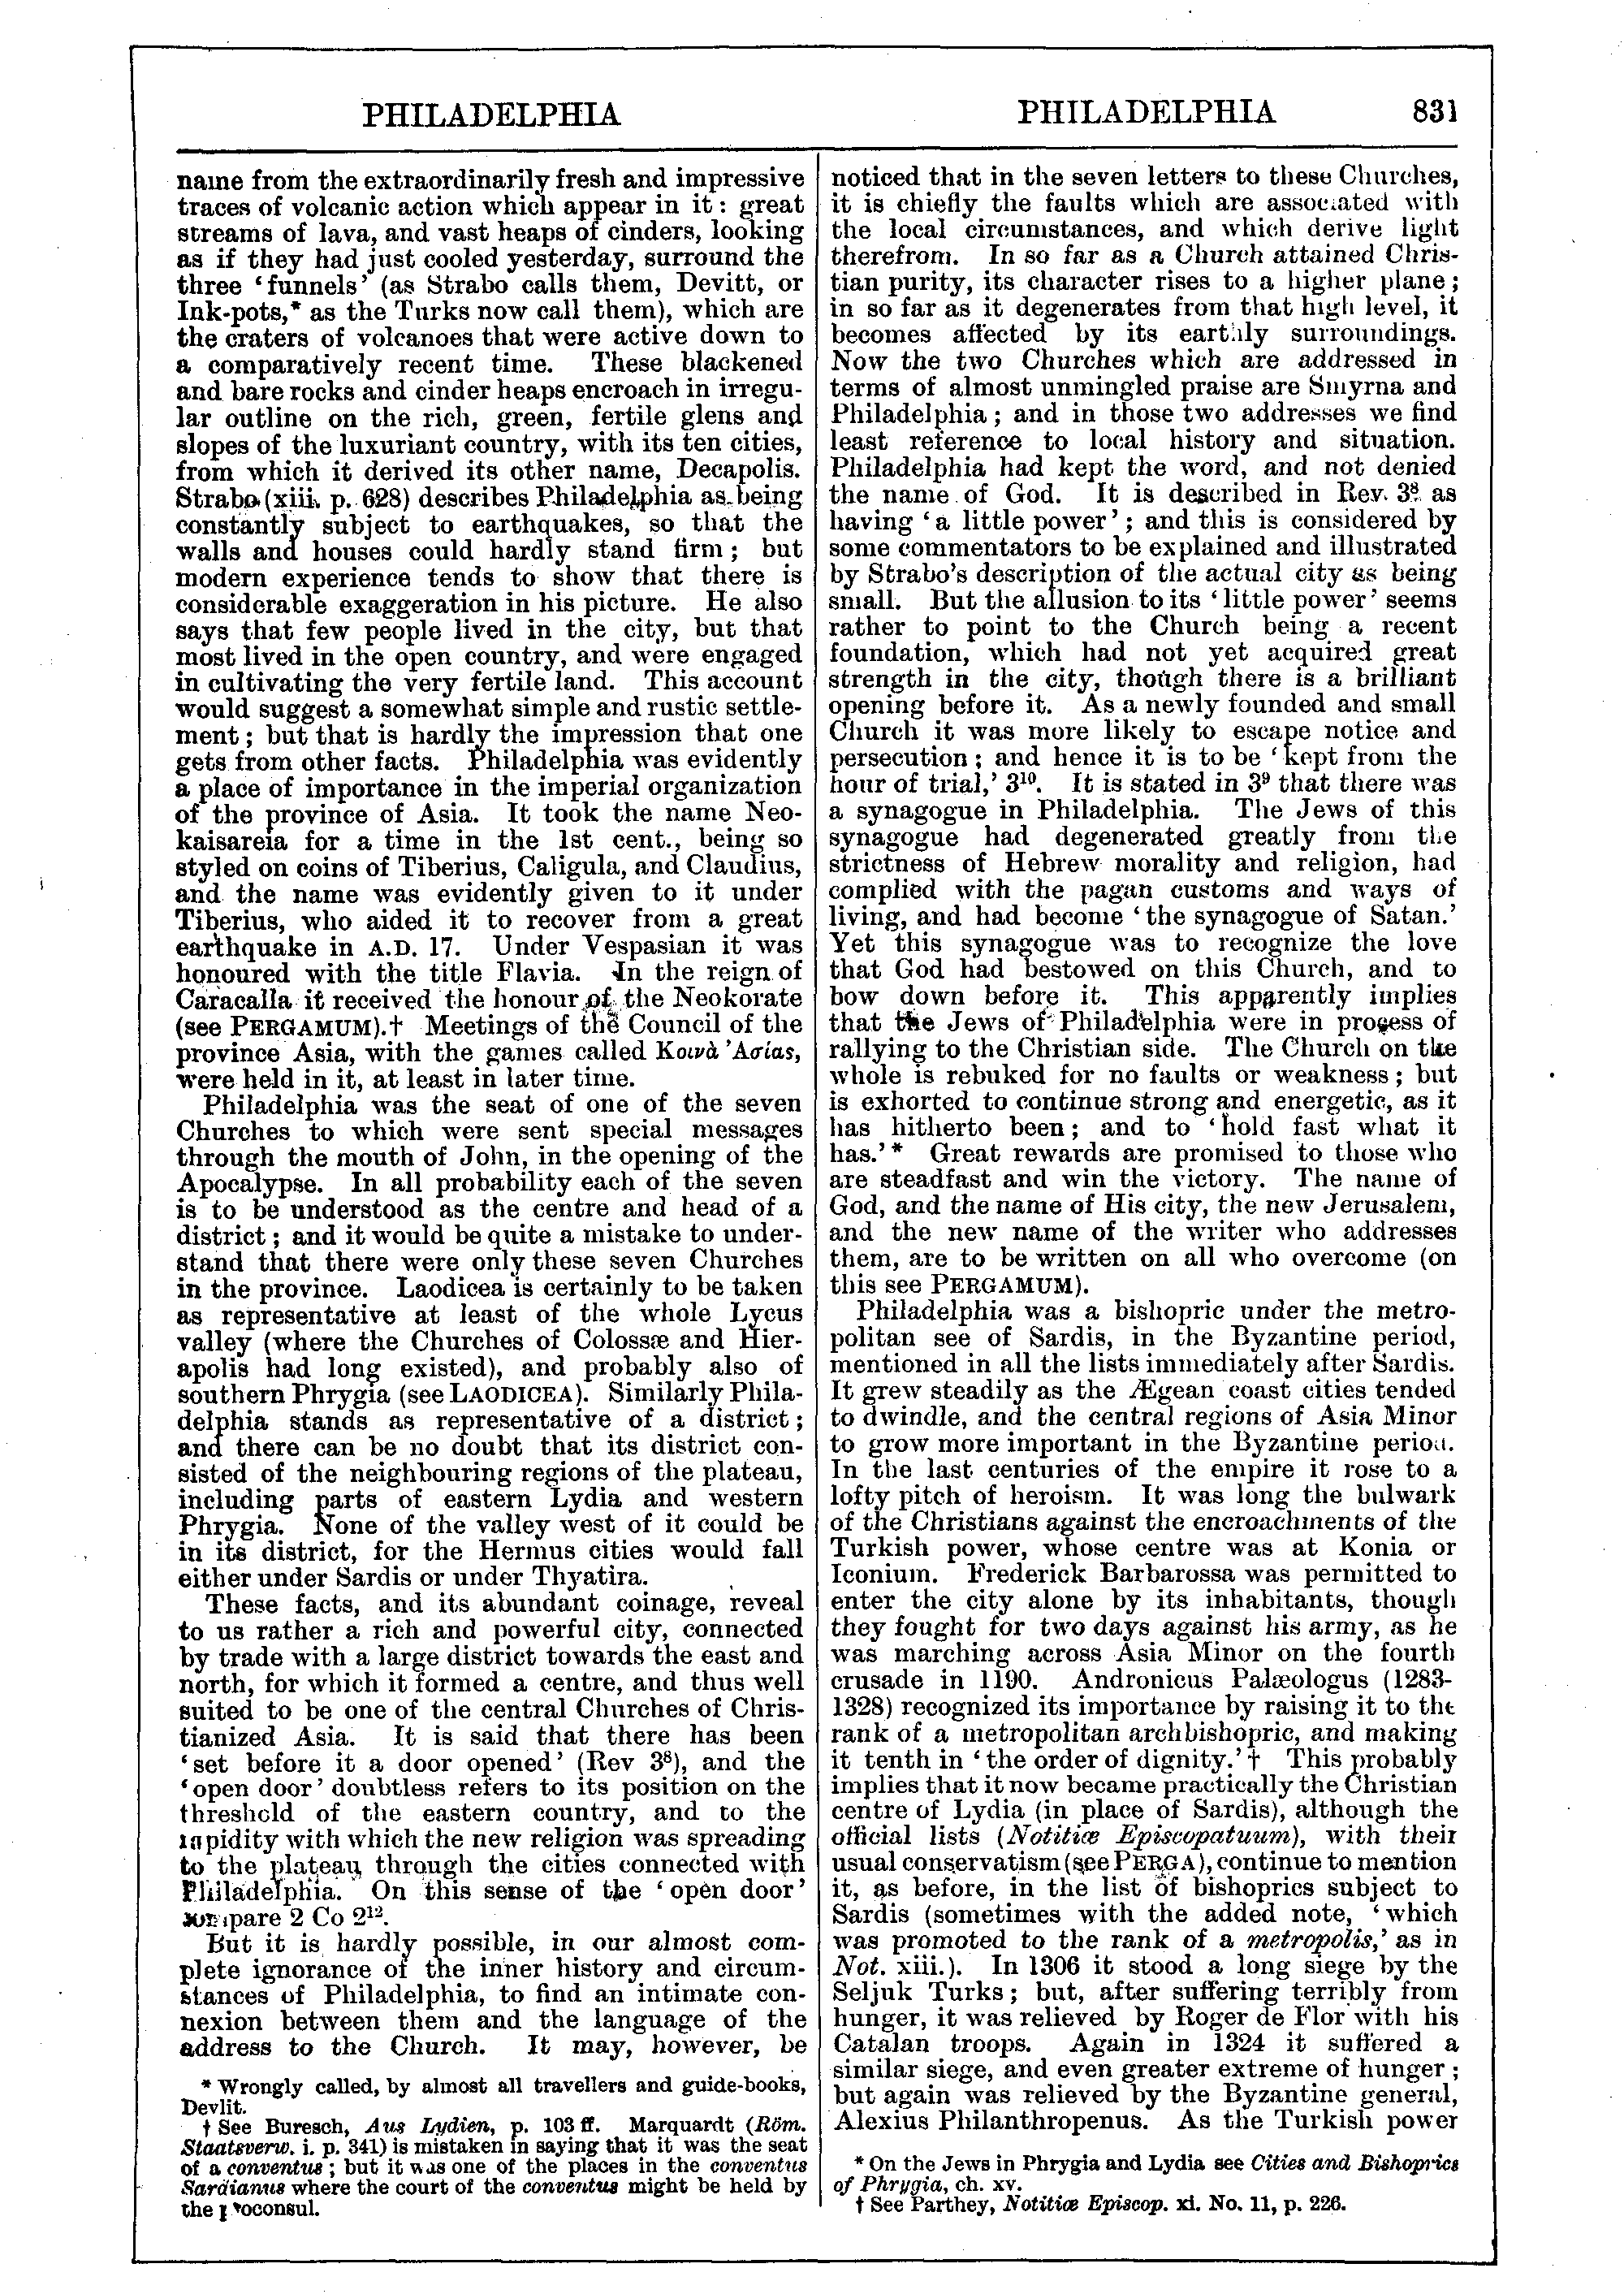 Image of page 831